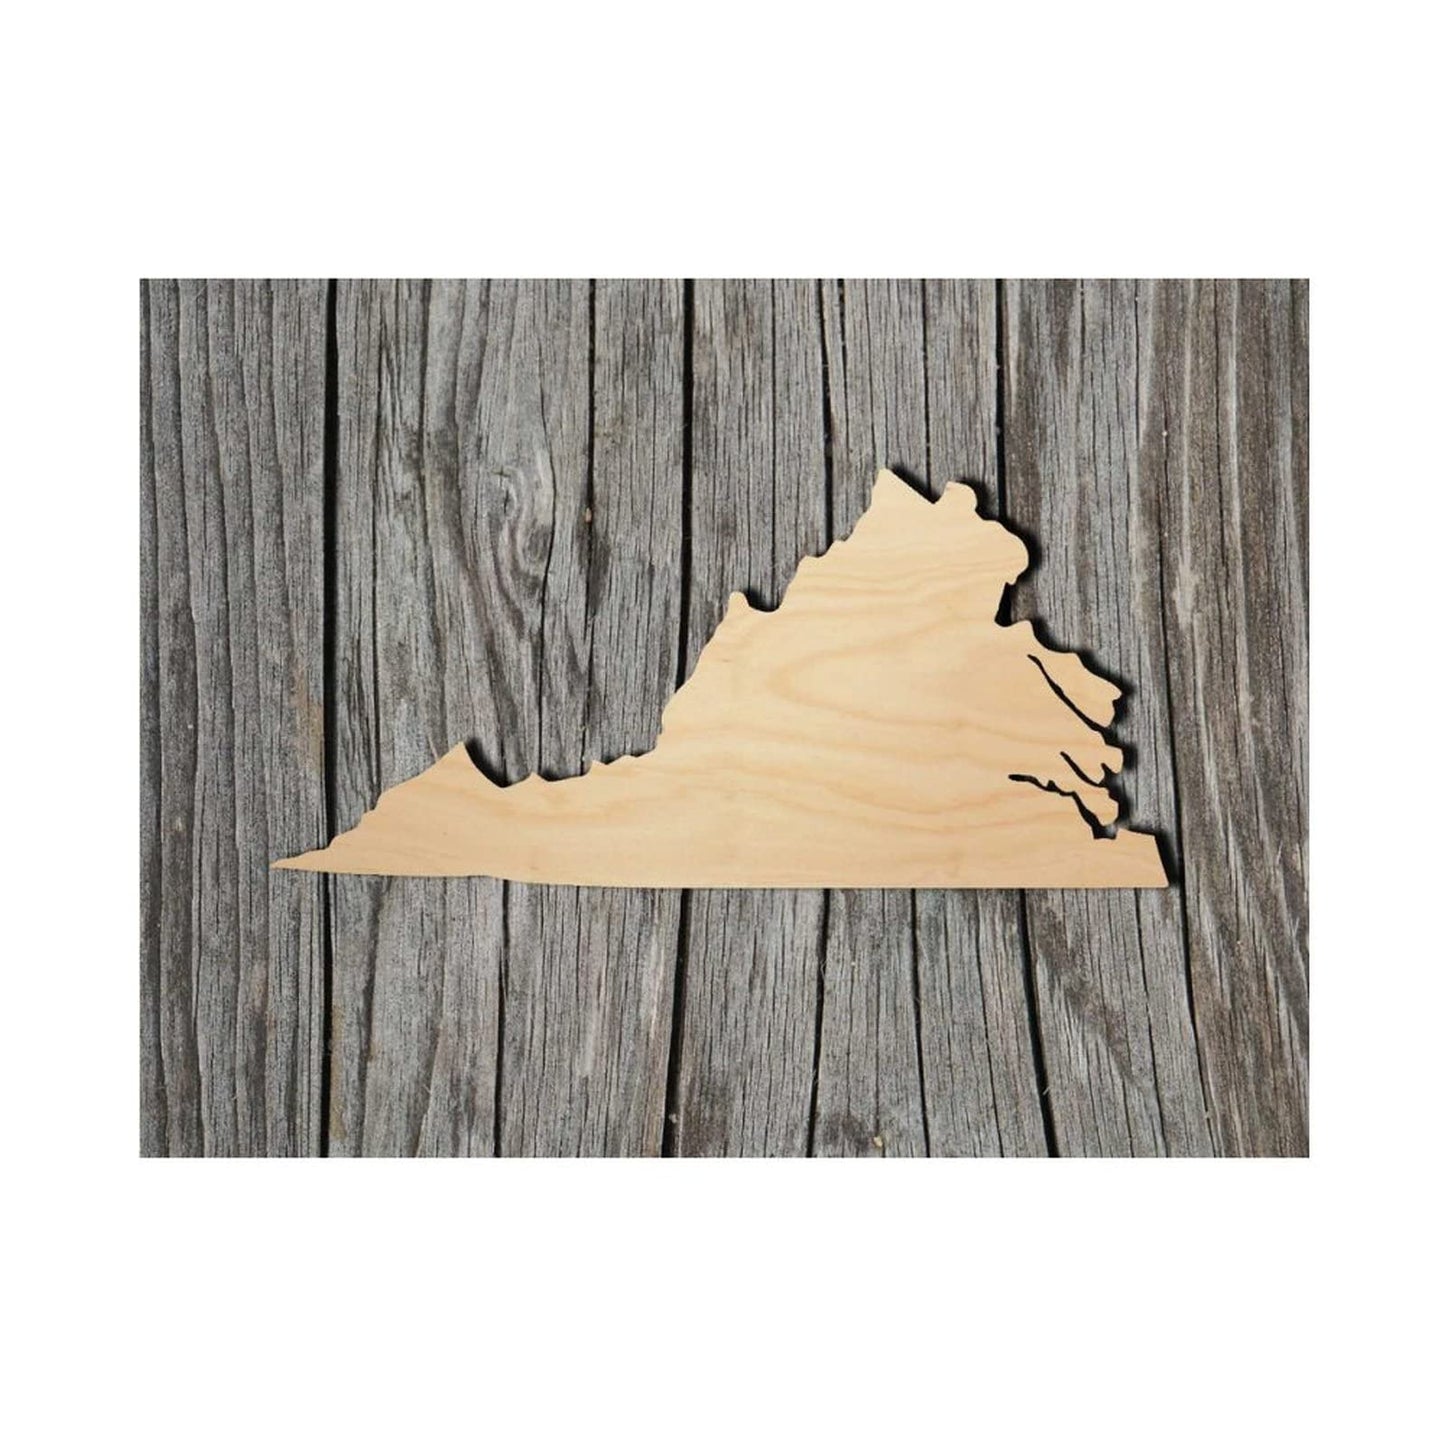 Virginia State Wood Craft,Unfinished Wooden Cutout Art,DIY Wood Sign, Inspirational Farmhouse Wall Plaque,Rustic Home Decor for Bedroom Kitchen